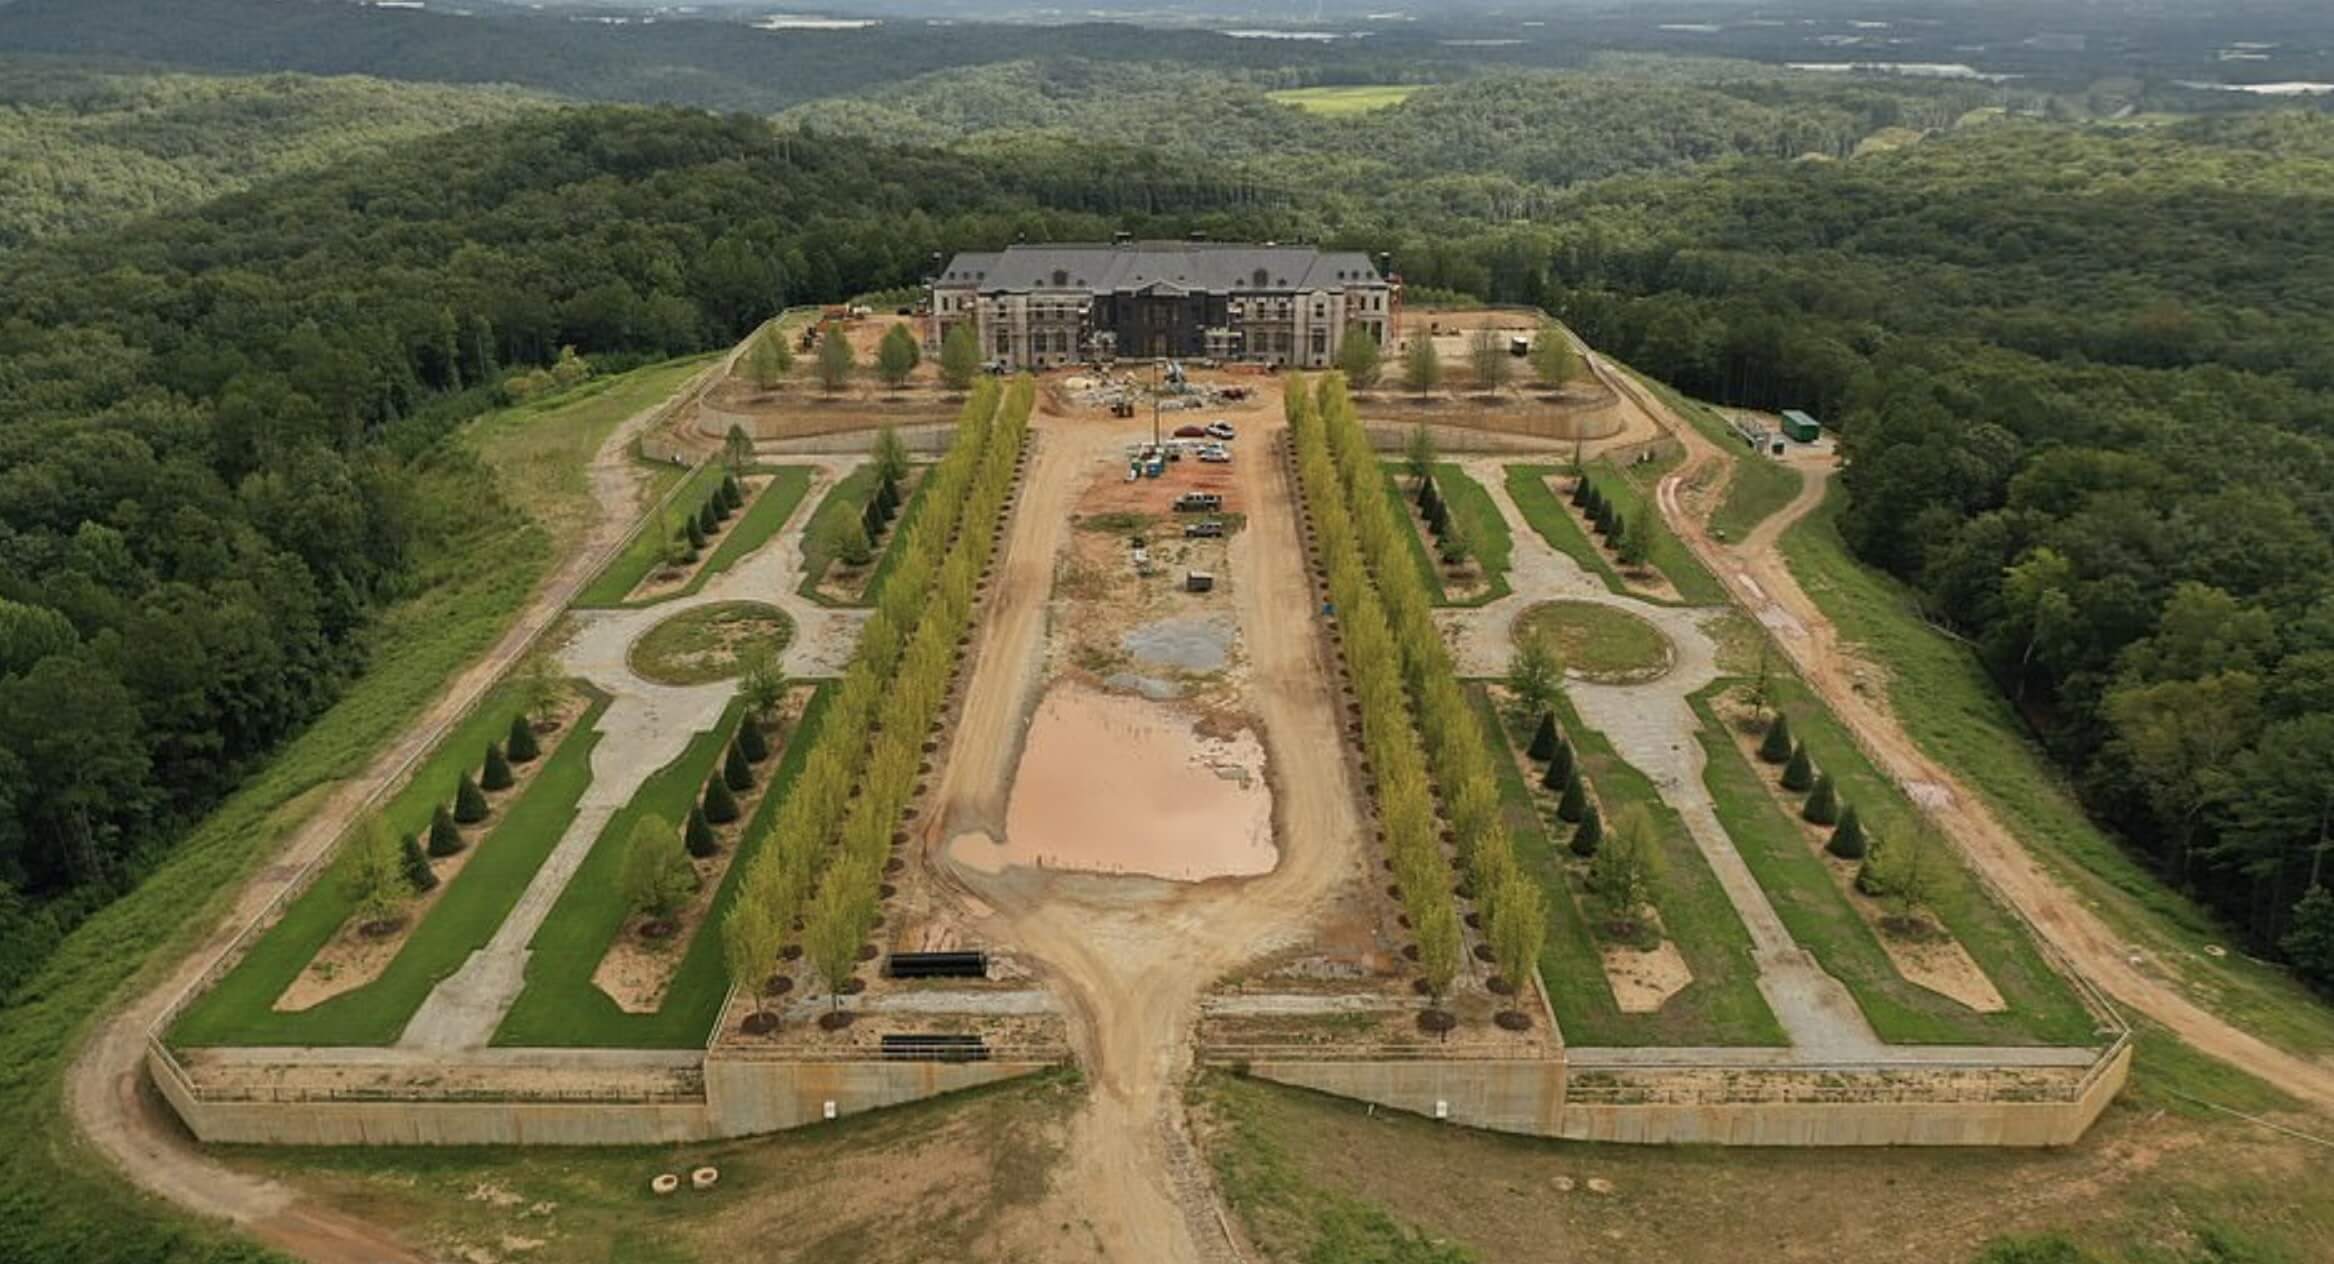 Tyler Perry's New House Epic 1,000 Acre Home in